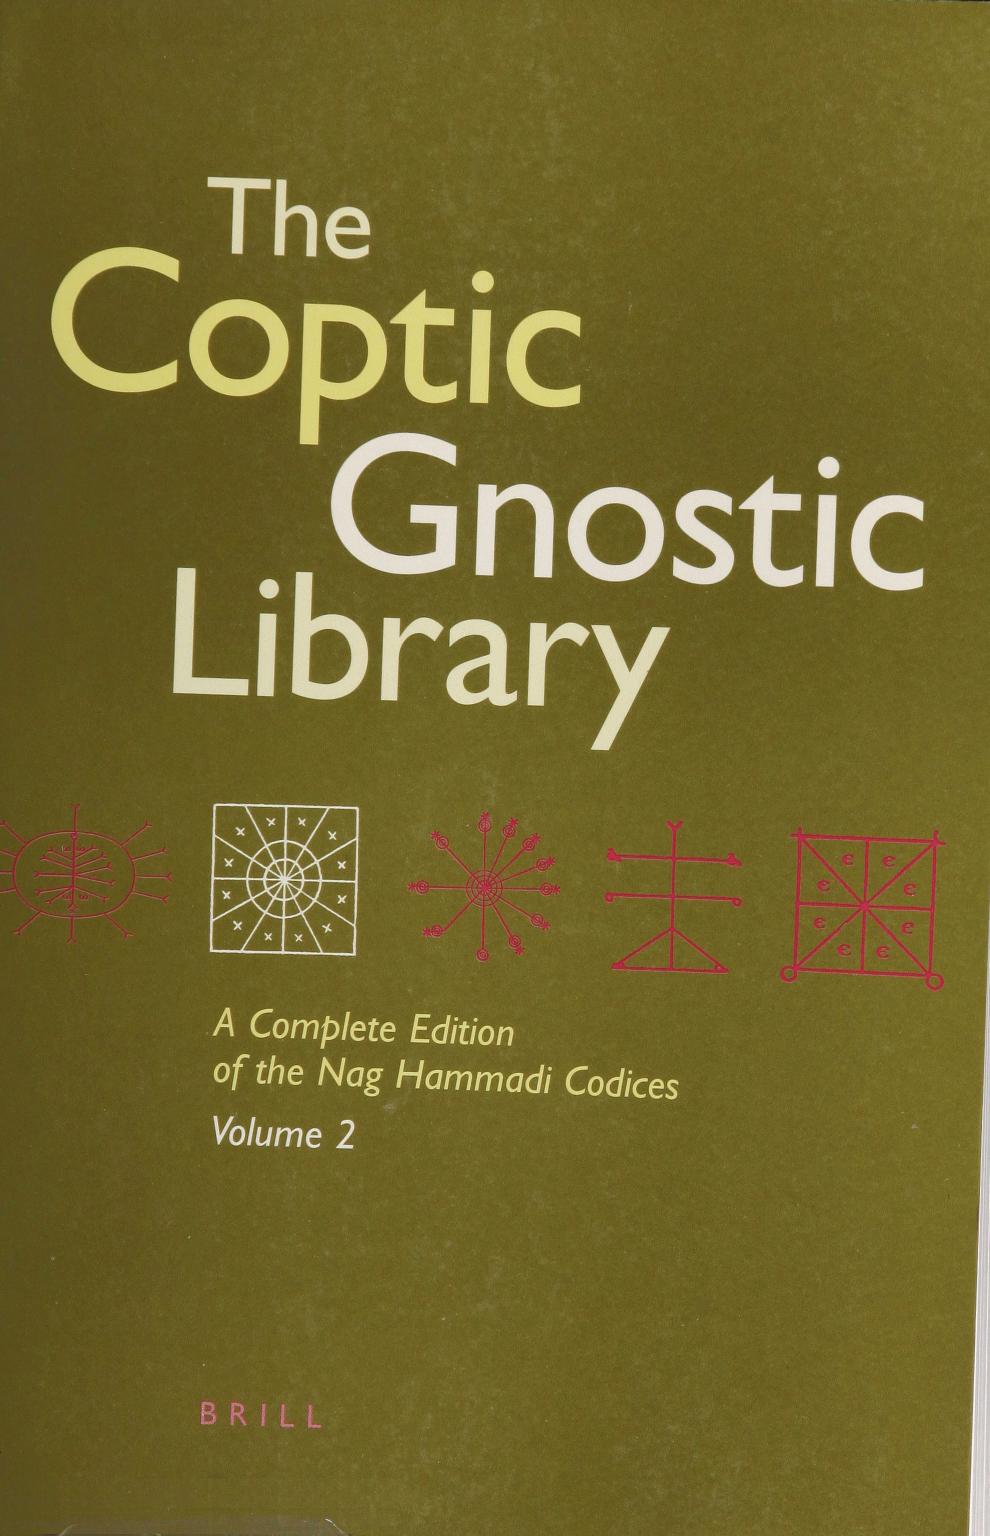 The Coptic Gnostic Library A Complete Edition of the Nag Hammadi Codices Volume 2